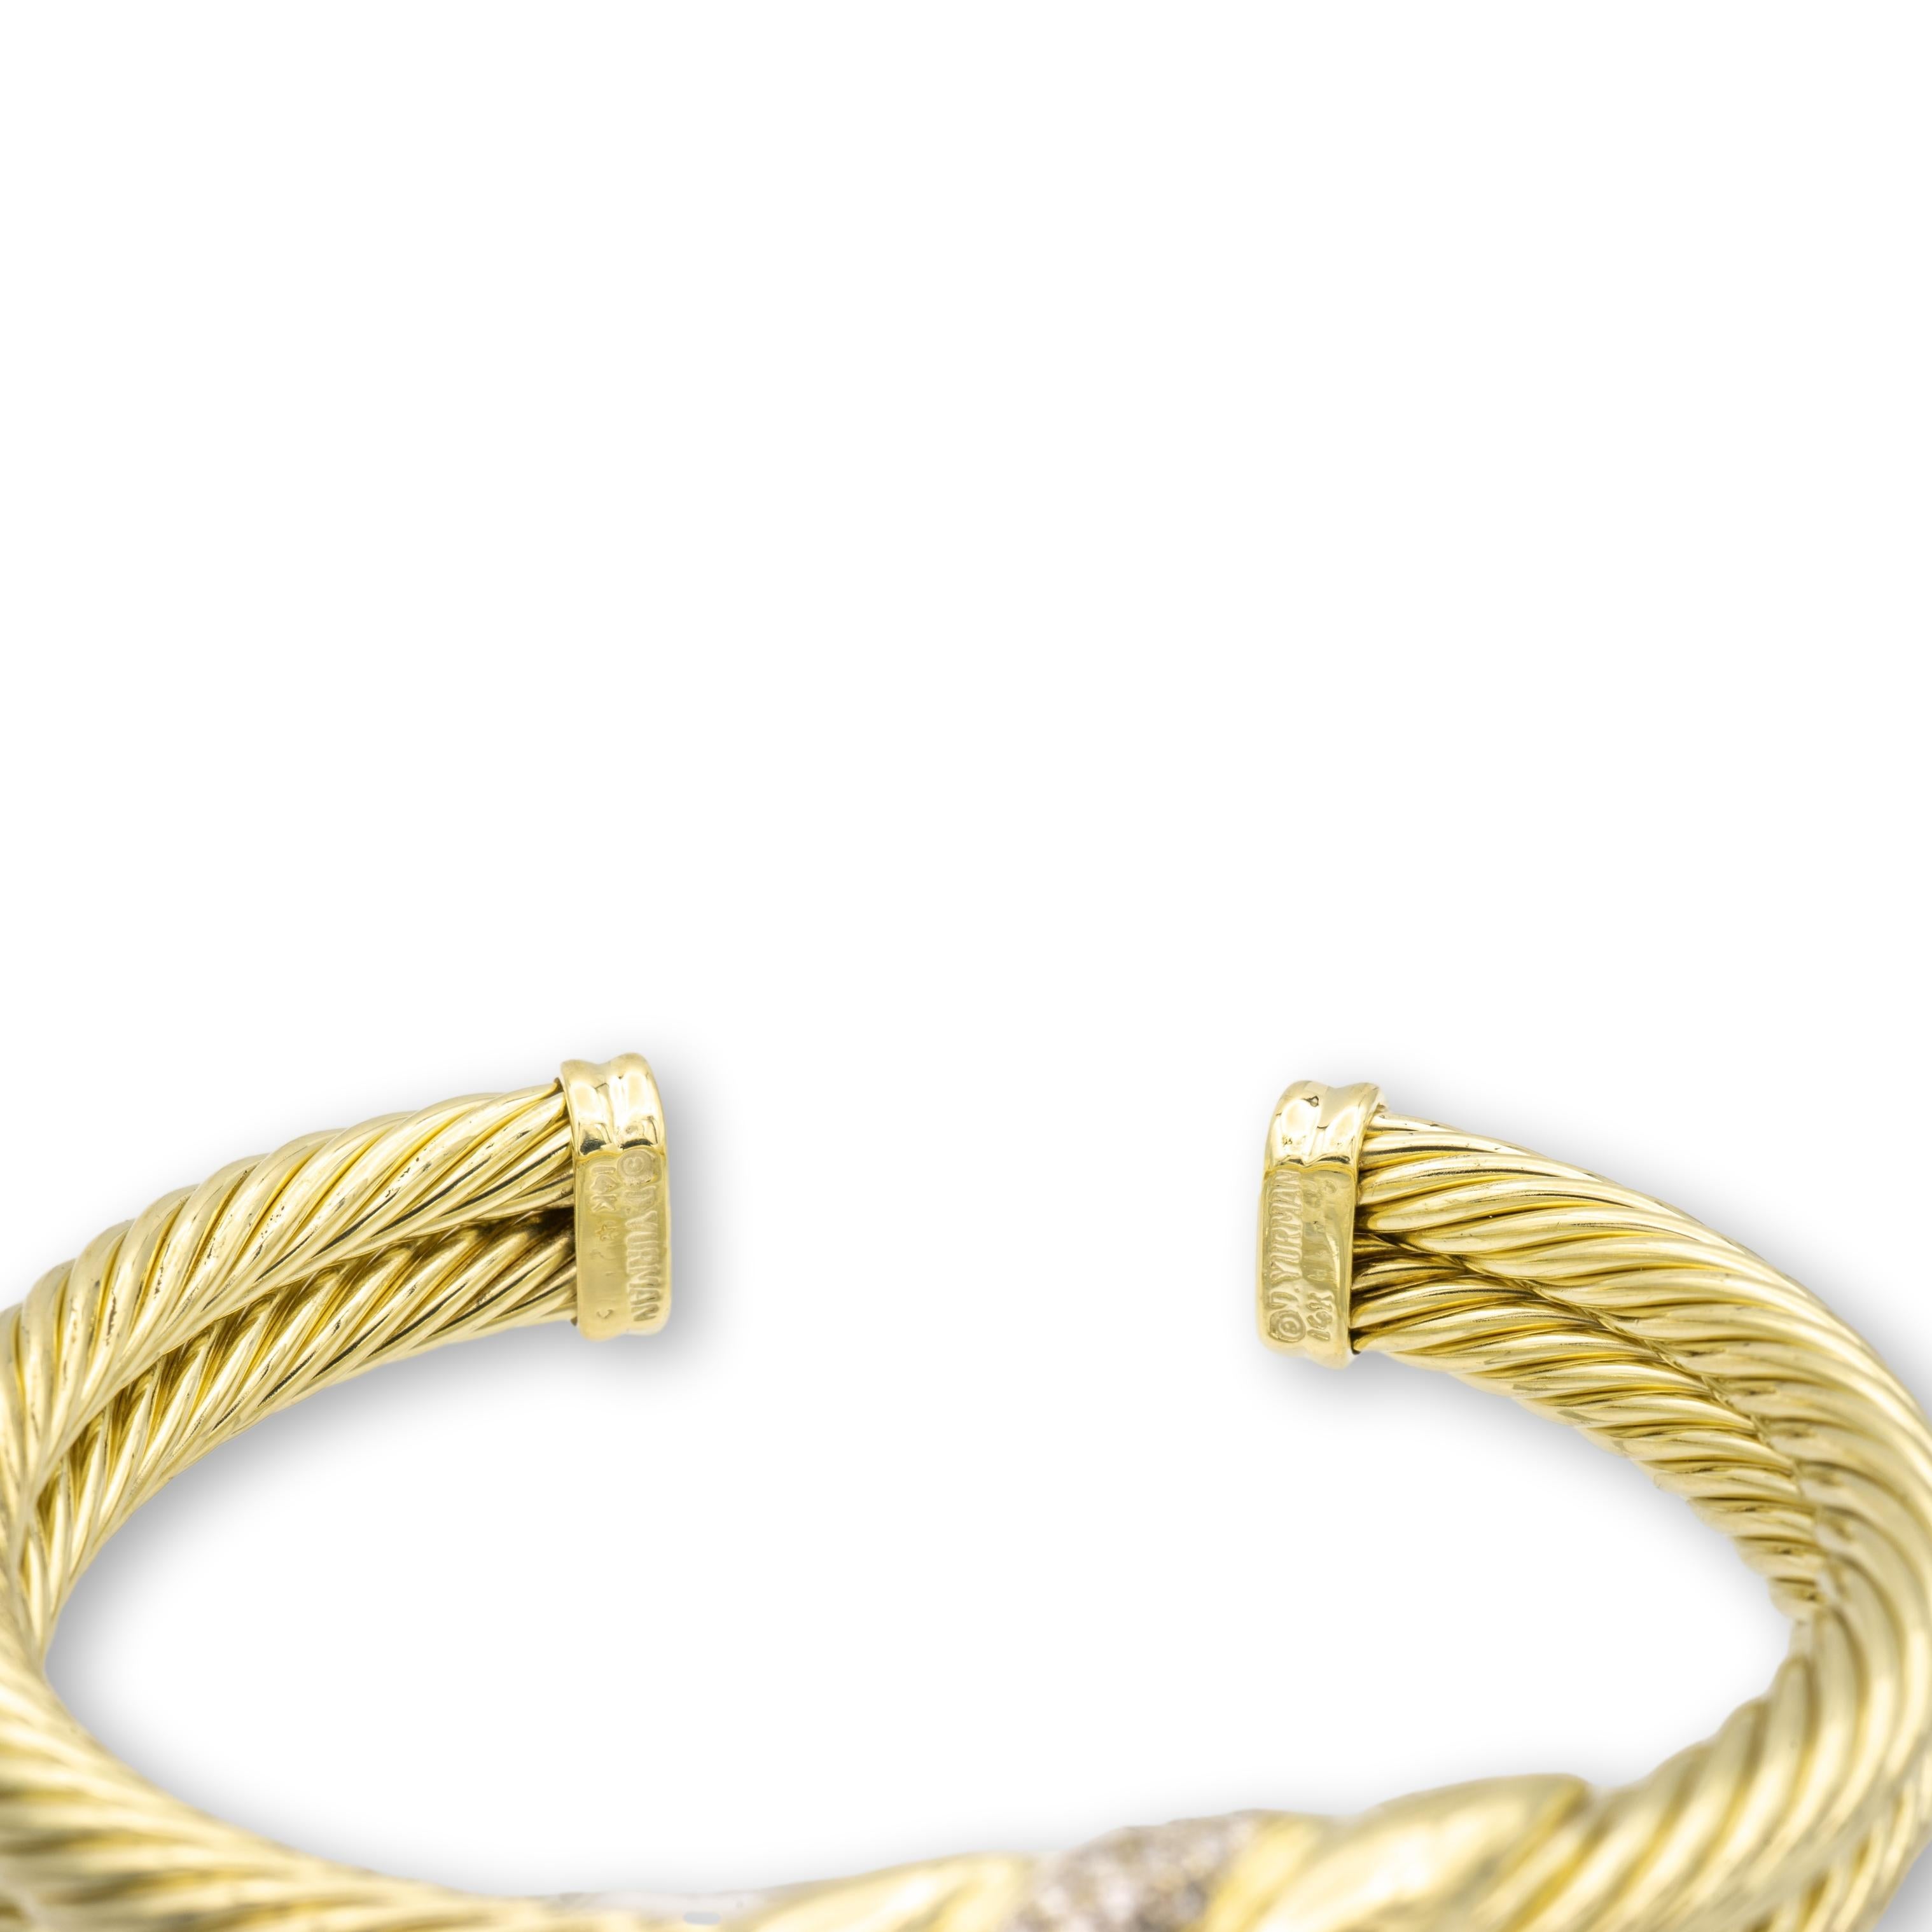 Vintage David Yurman open cuff bracelet from the Cable Classics collection finely crafted in 14 karat yellow gold with two rows of twisted cable adorned with a triple wave embellishment center featuring pave set round brilliant cut diamonds weighing